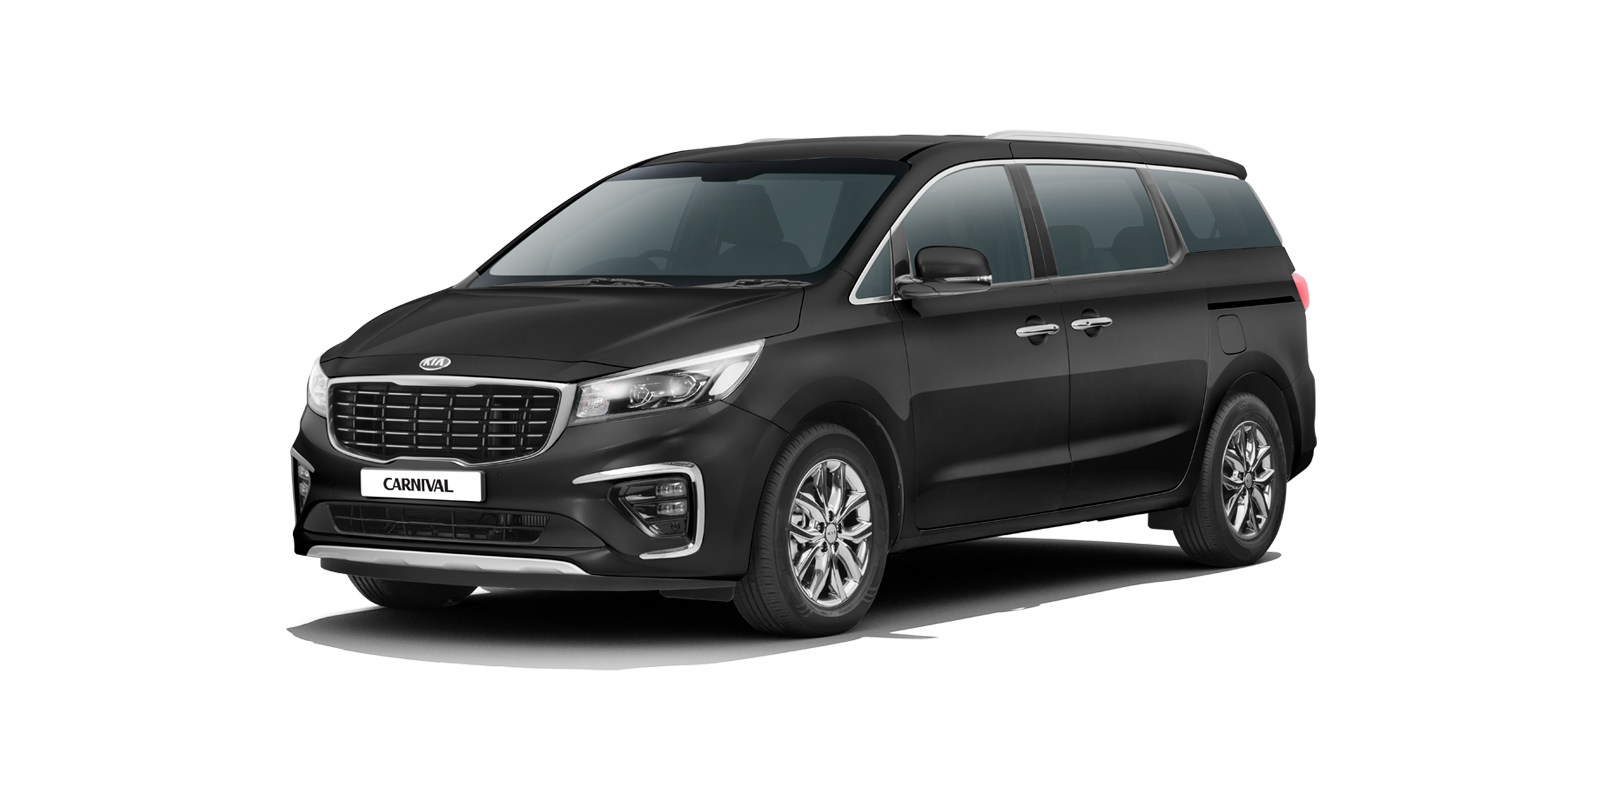 Kia Carnival Extravagant by Design. Booking Open Now